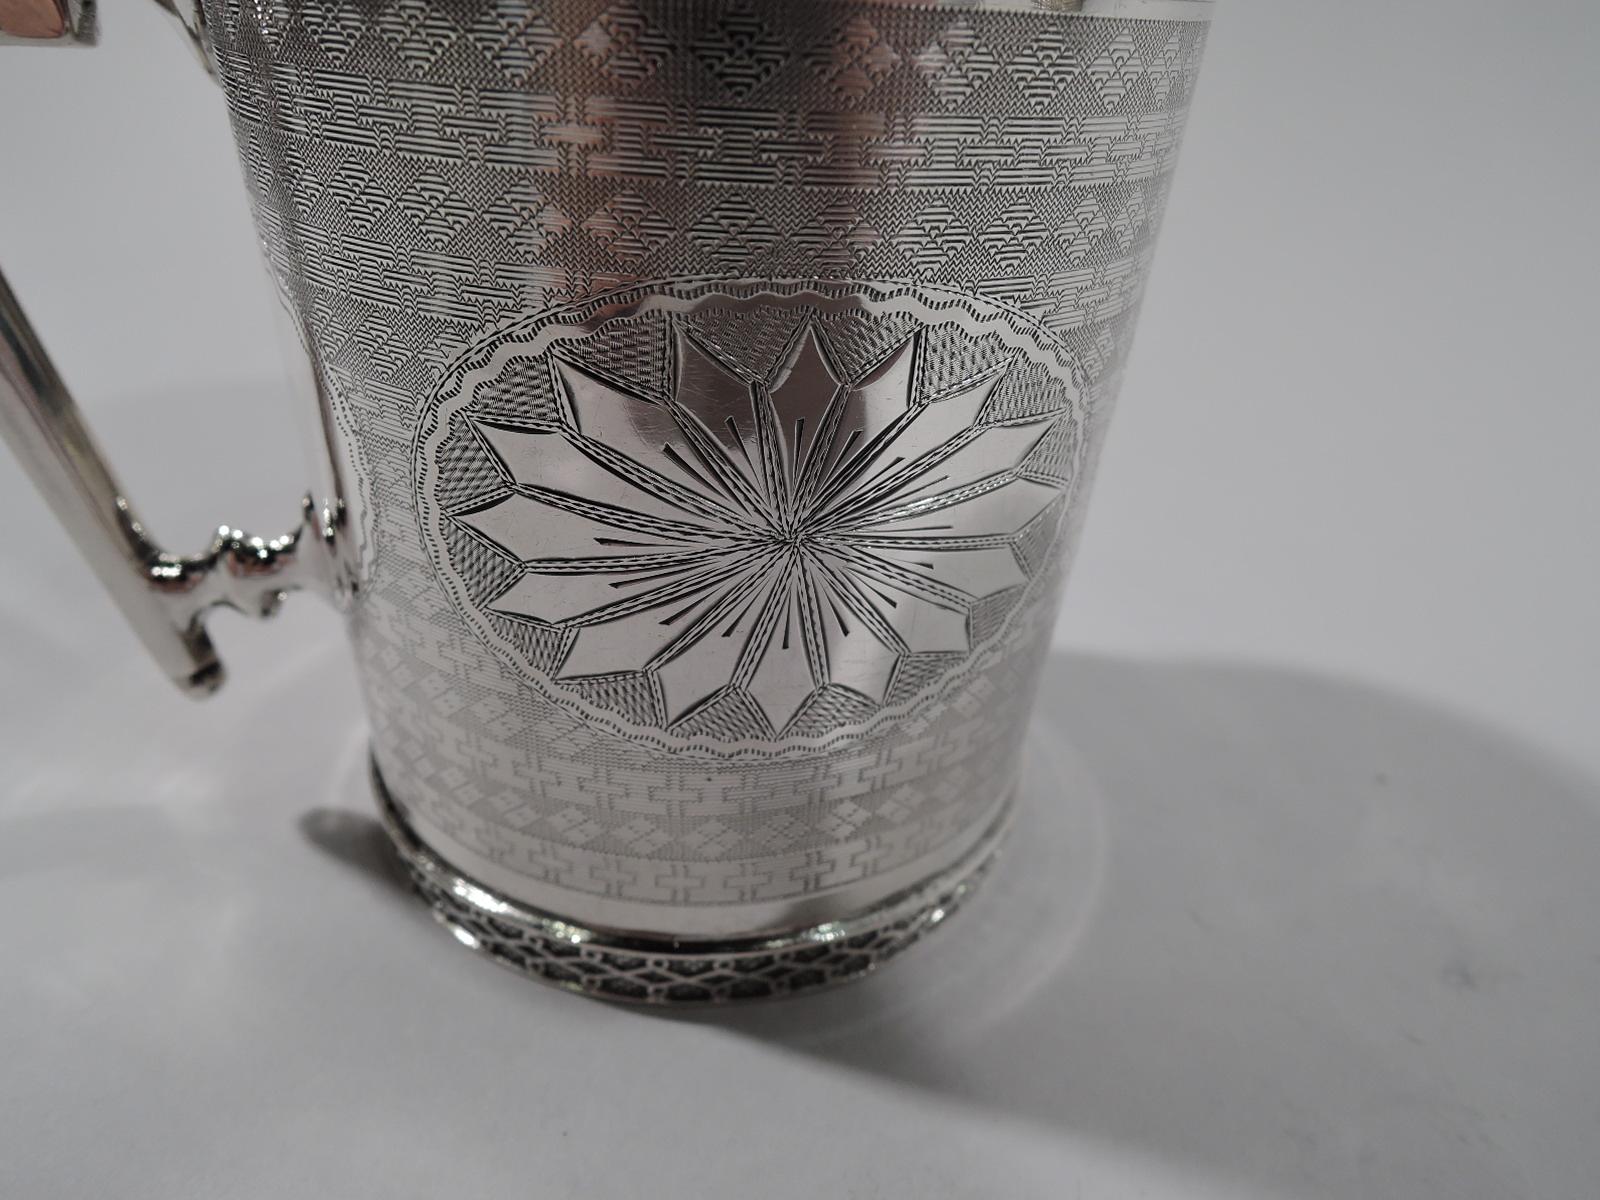 Aesthetic Movement Aesthetic Classical Coin Silver Baby Cup by Northwestern of Chicago